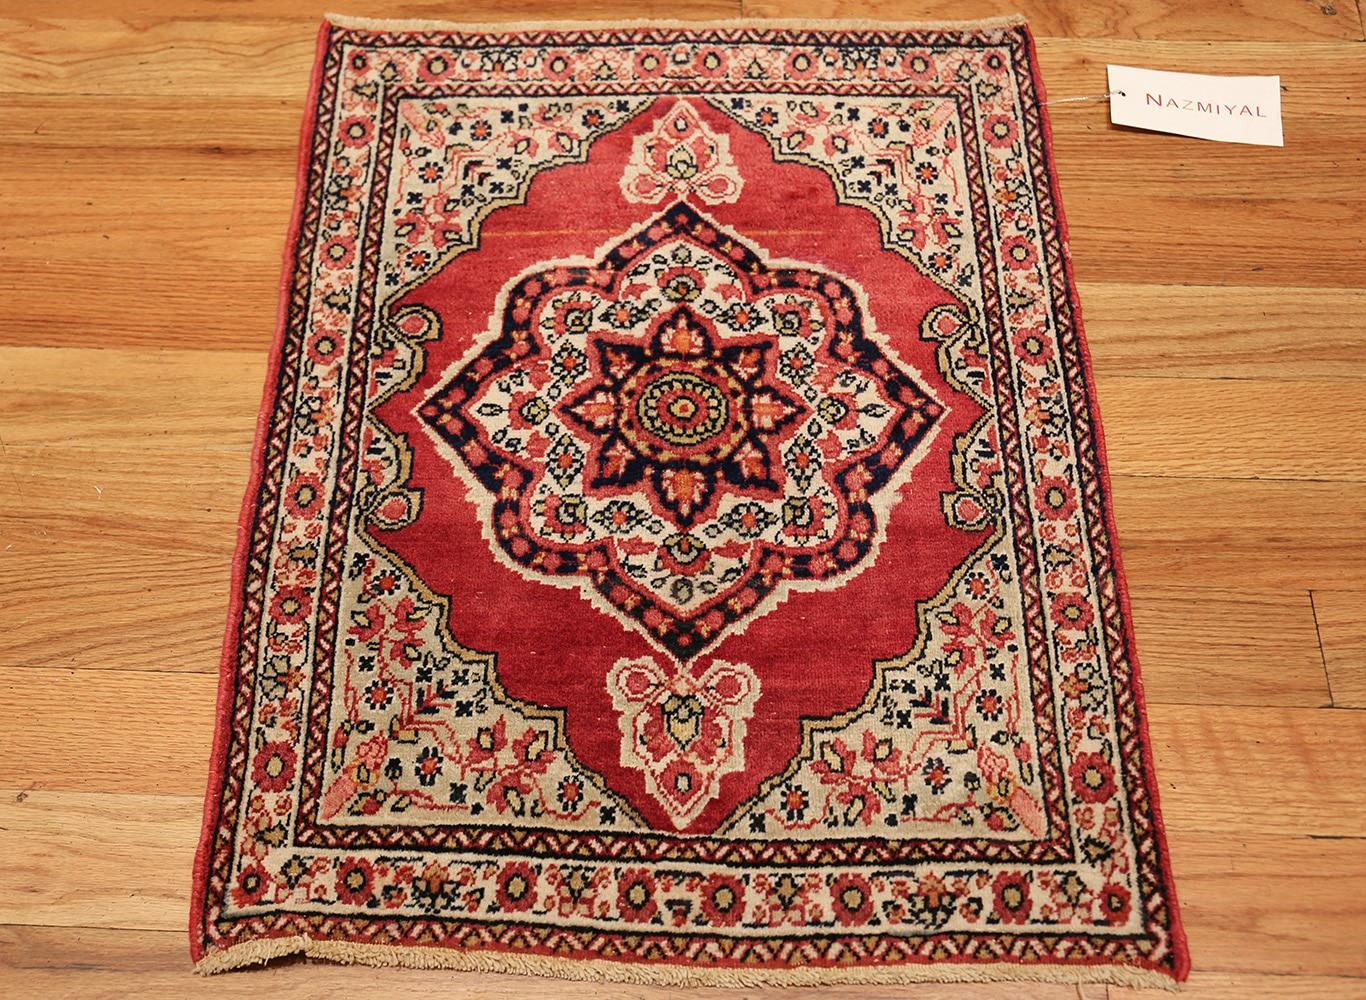 Hand-Knotted Small Mat Size Antique Persian Kerman Floral Rug. Size: 1 ft 10 in x 2 ft 6 in